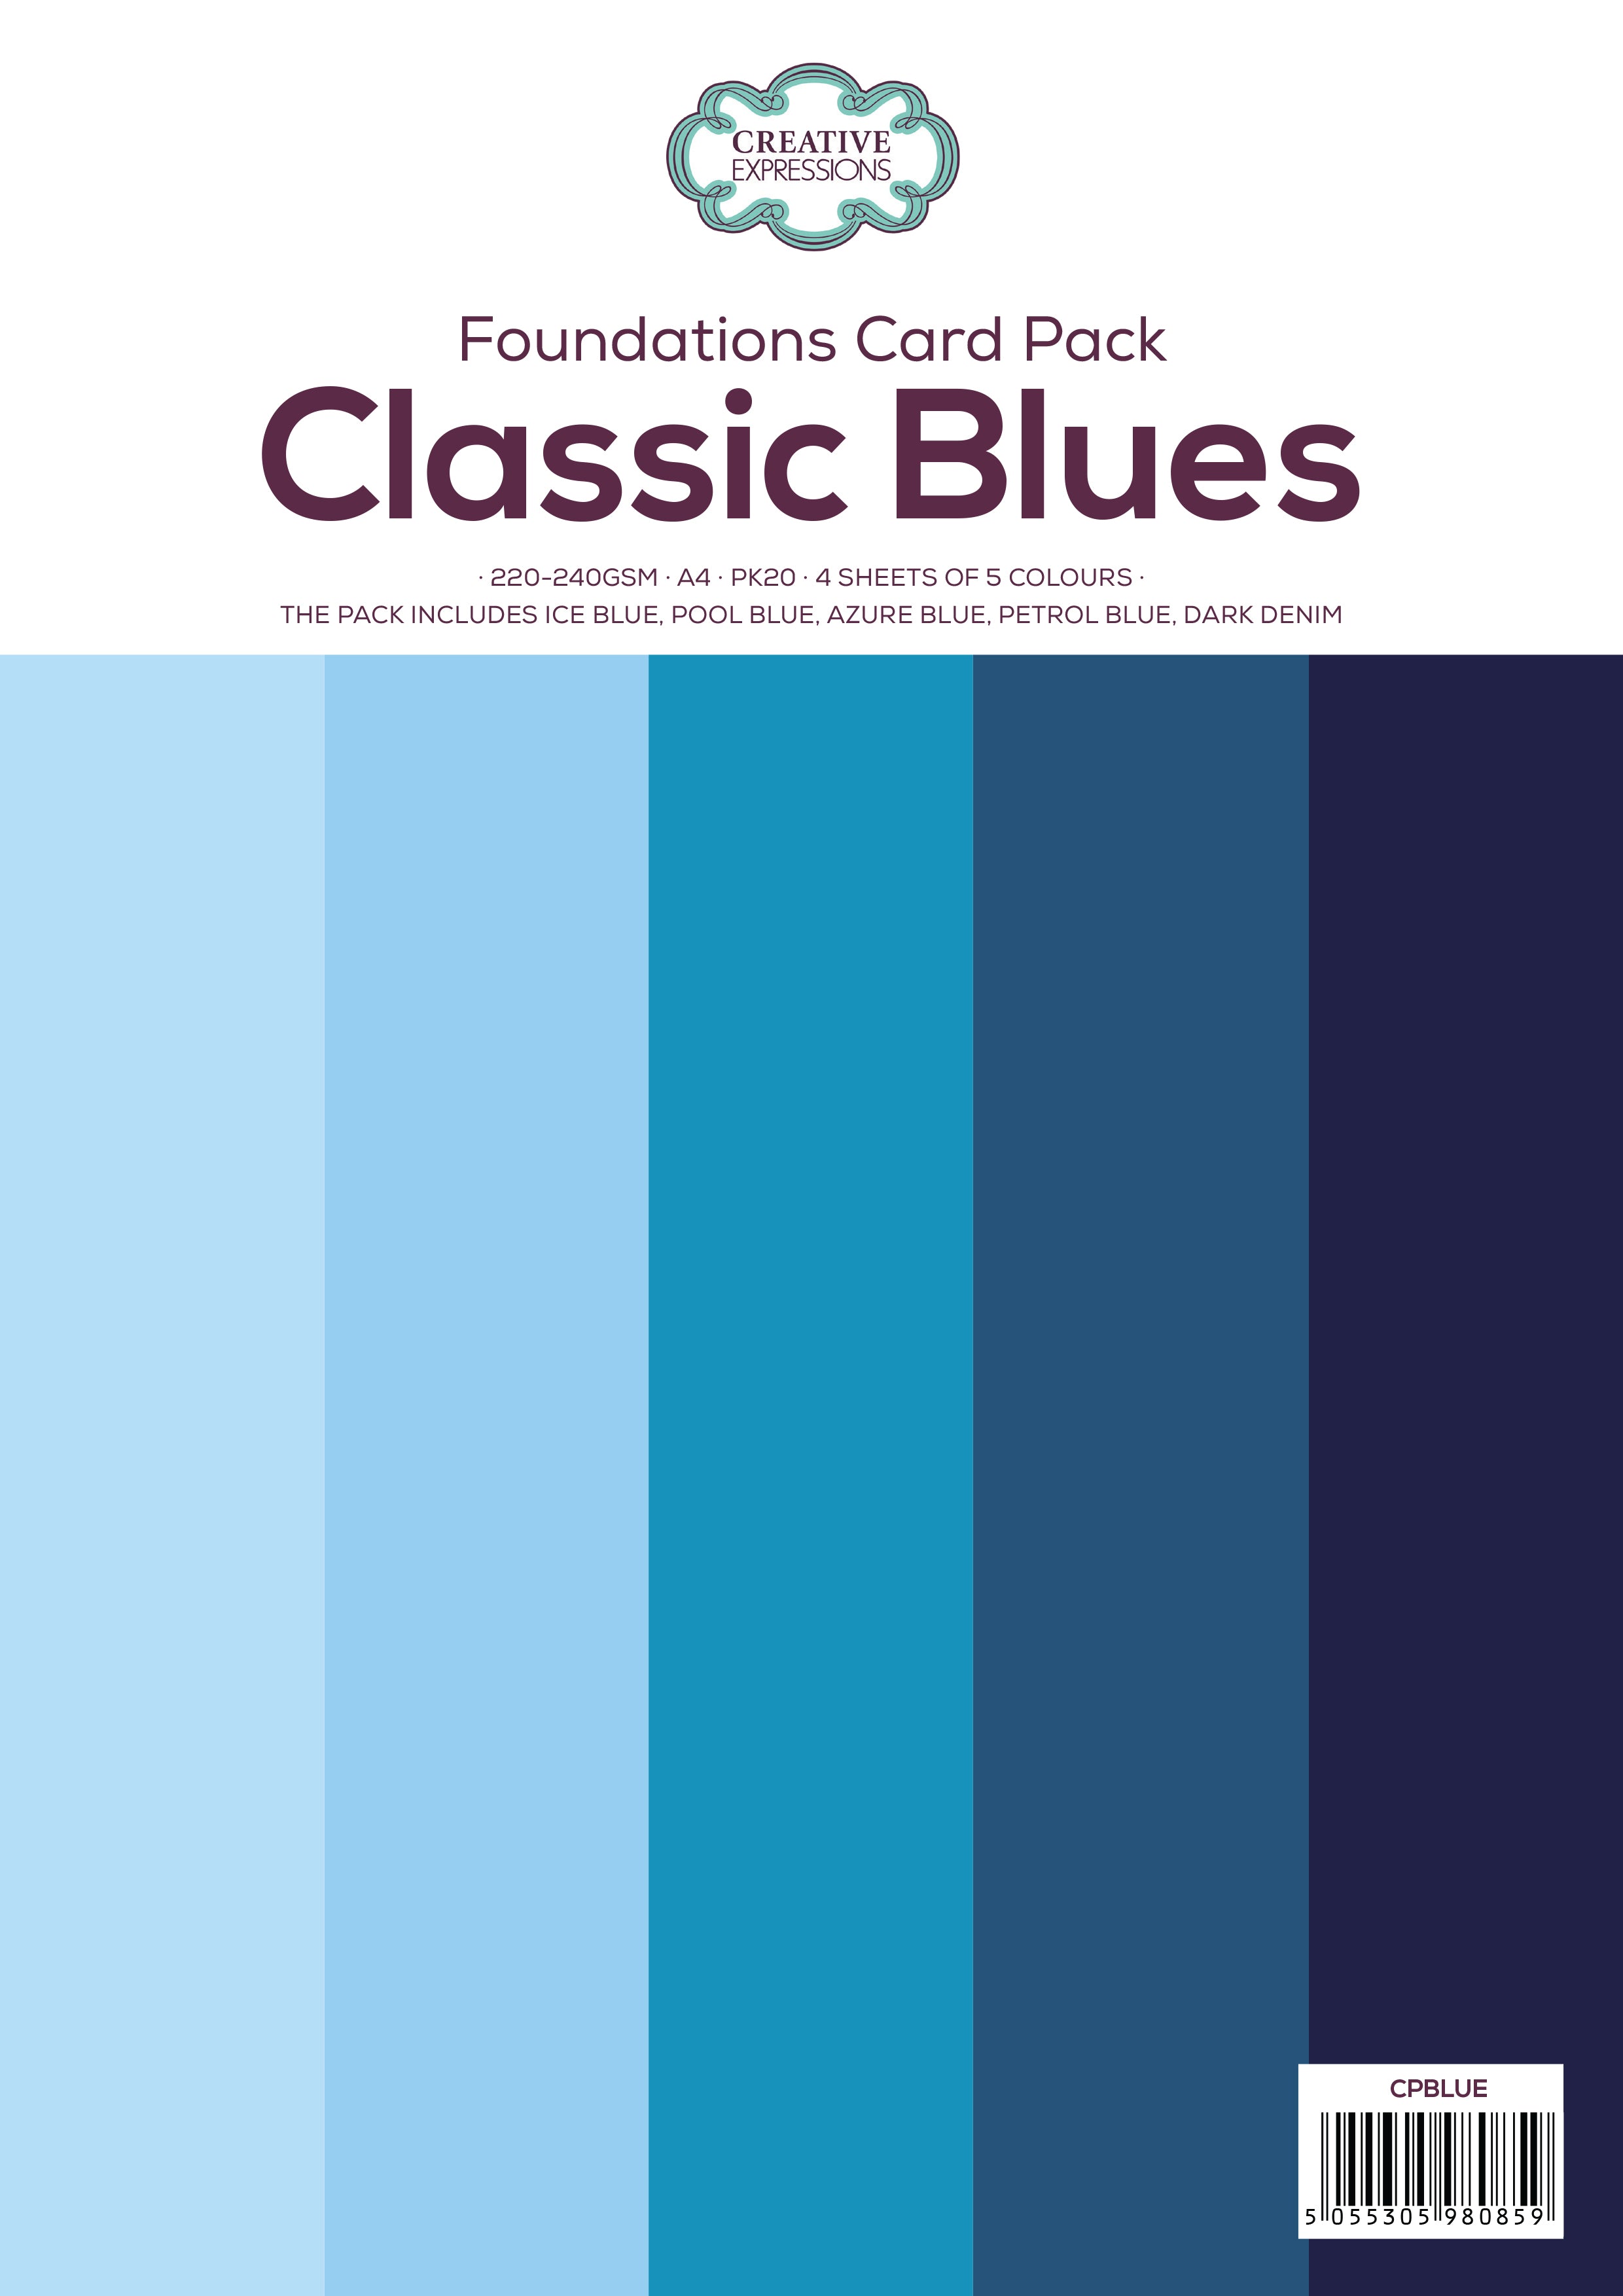 Creative Expressions Classic Blues Paper Pack 220-240gsm A4 Pk20 4 Sheets Of 5 Colours